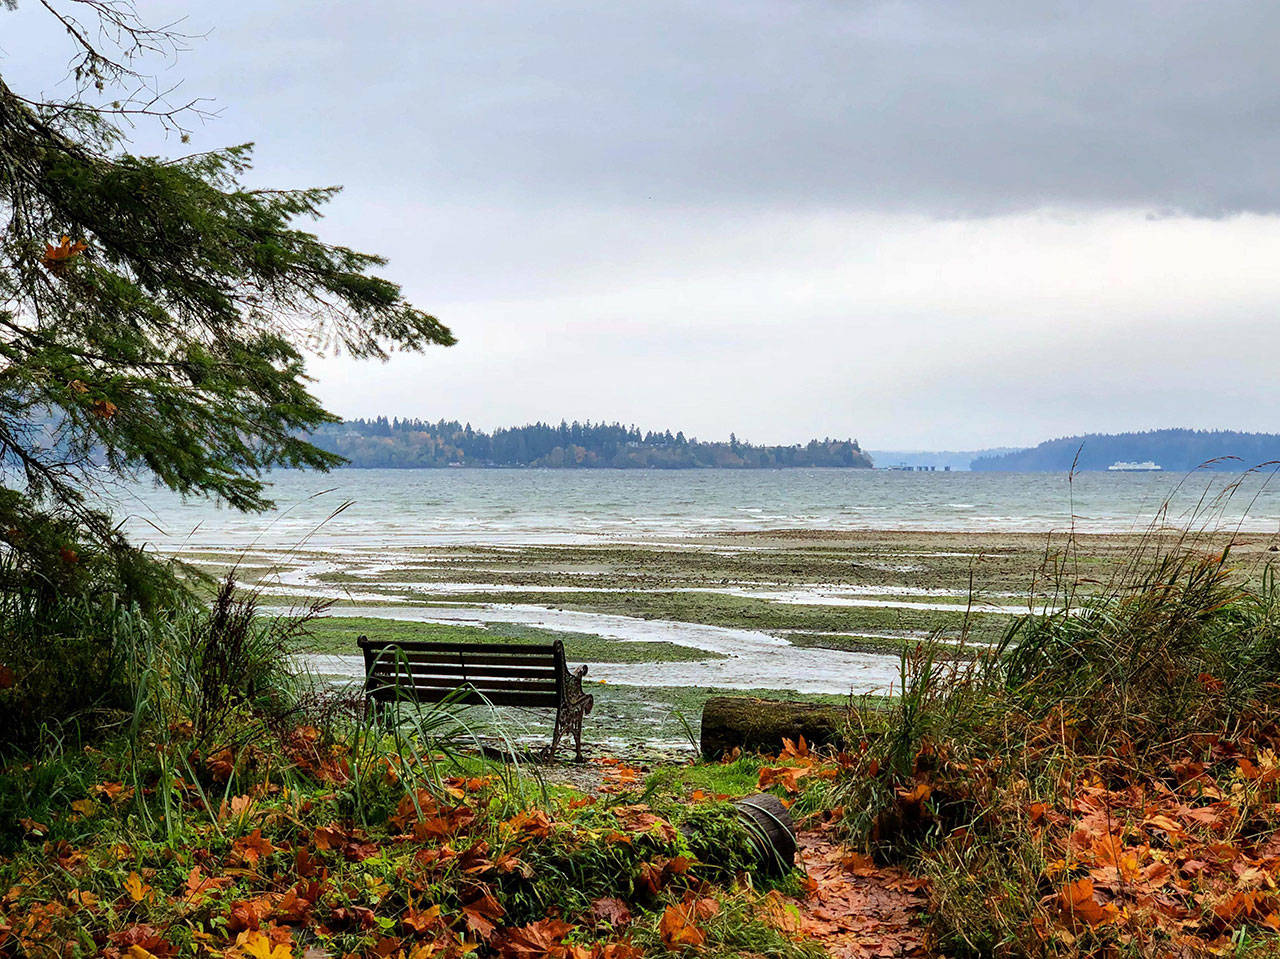 The Land Trust’s Fern Cove Preserve offers a quiet place to reflect on the past year and contemplate the new one. (Jake Conroy Photo)